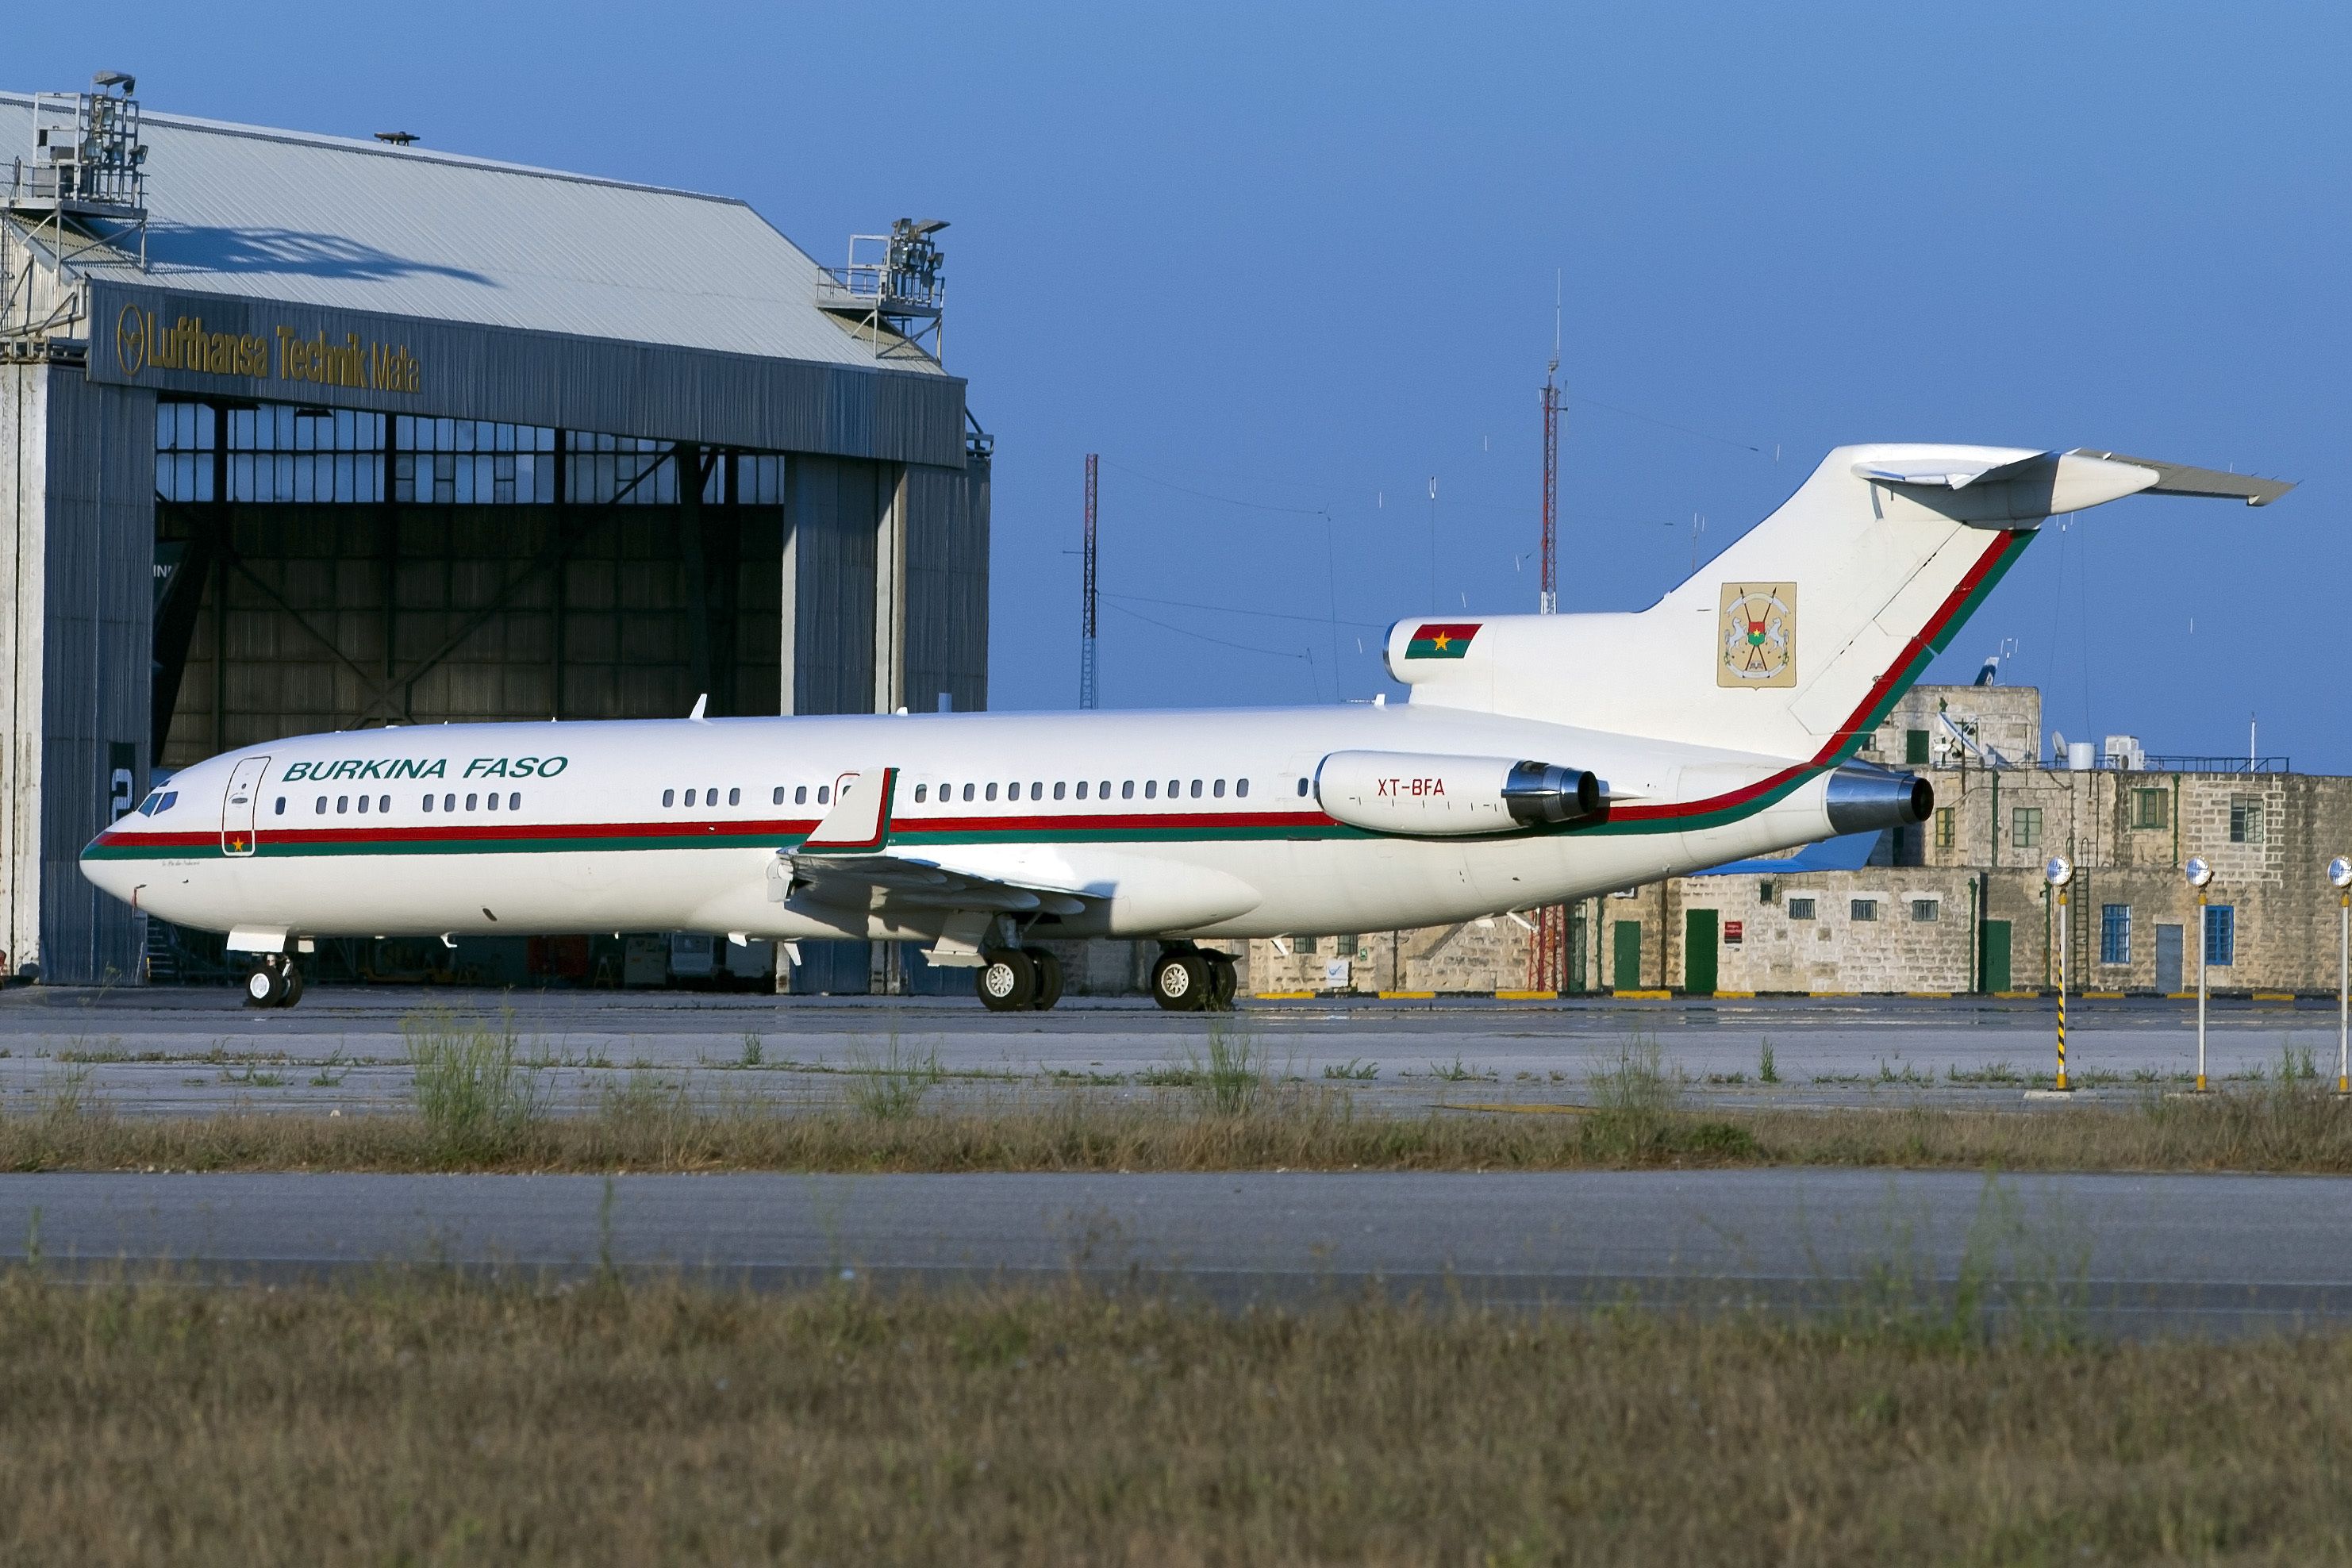 A Burkina Faso Government Boeing 727 parked on an airport apron.